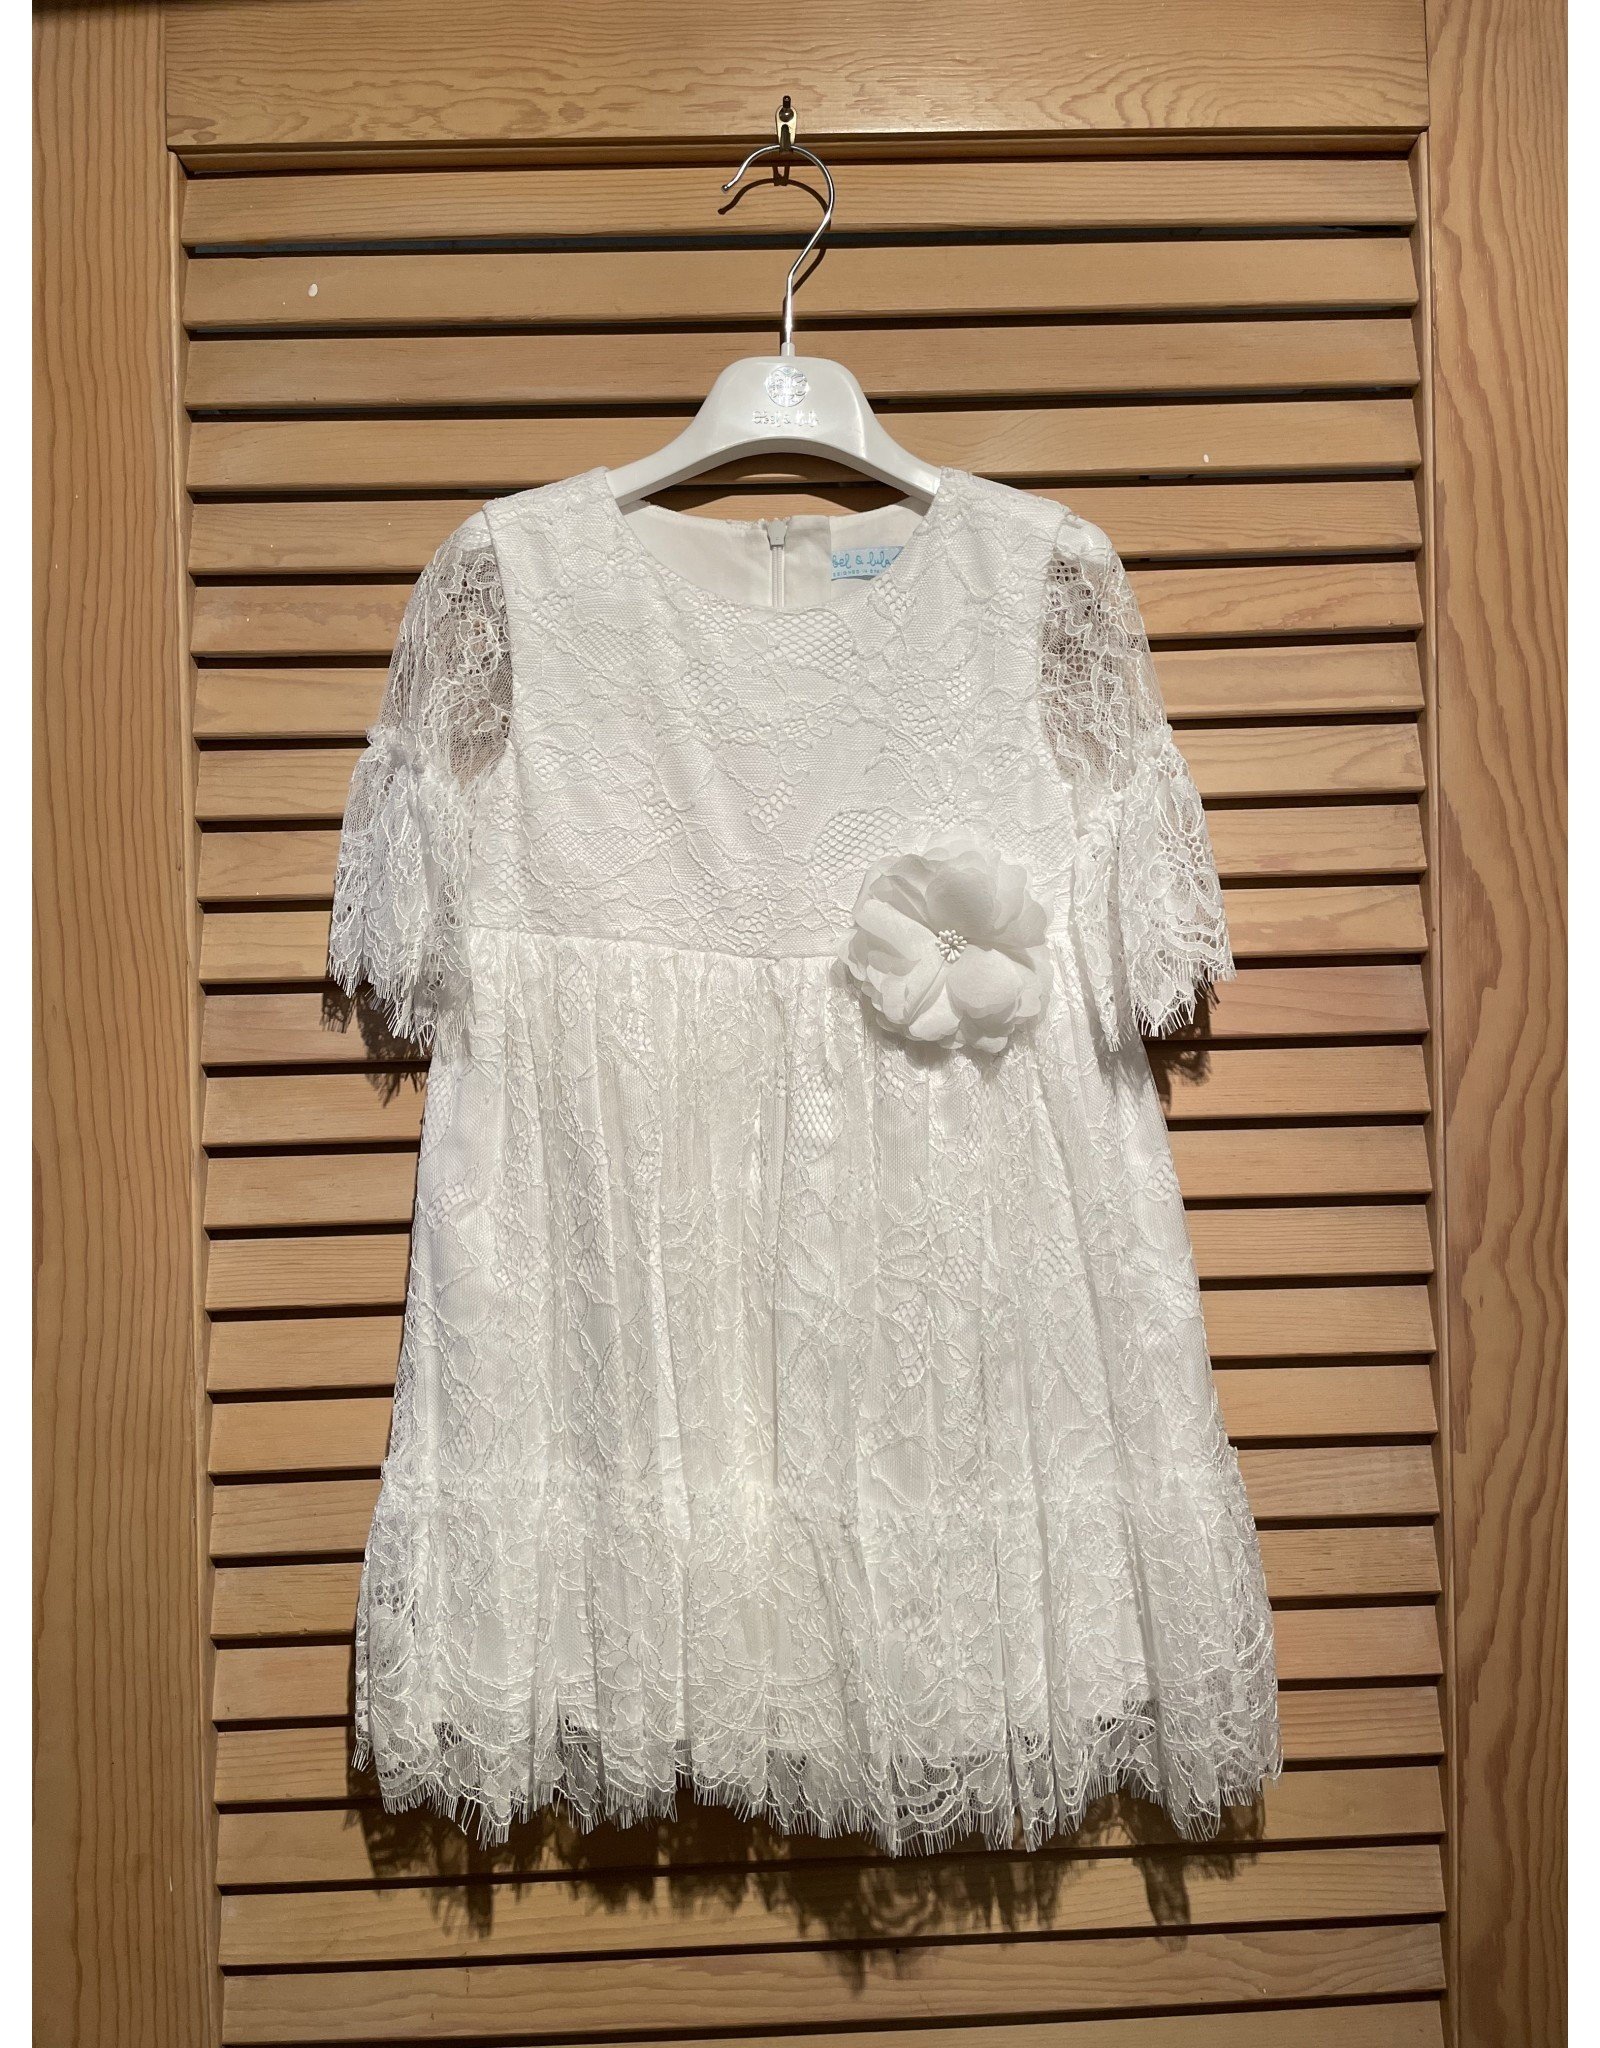 Abel & Lula White Floral Embroidered Dress with Lace Sleeve (size 10)